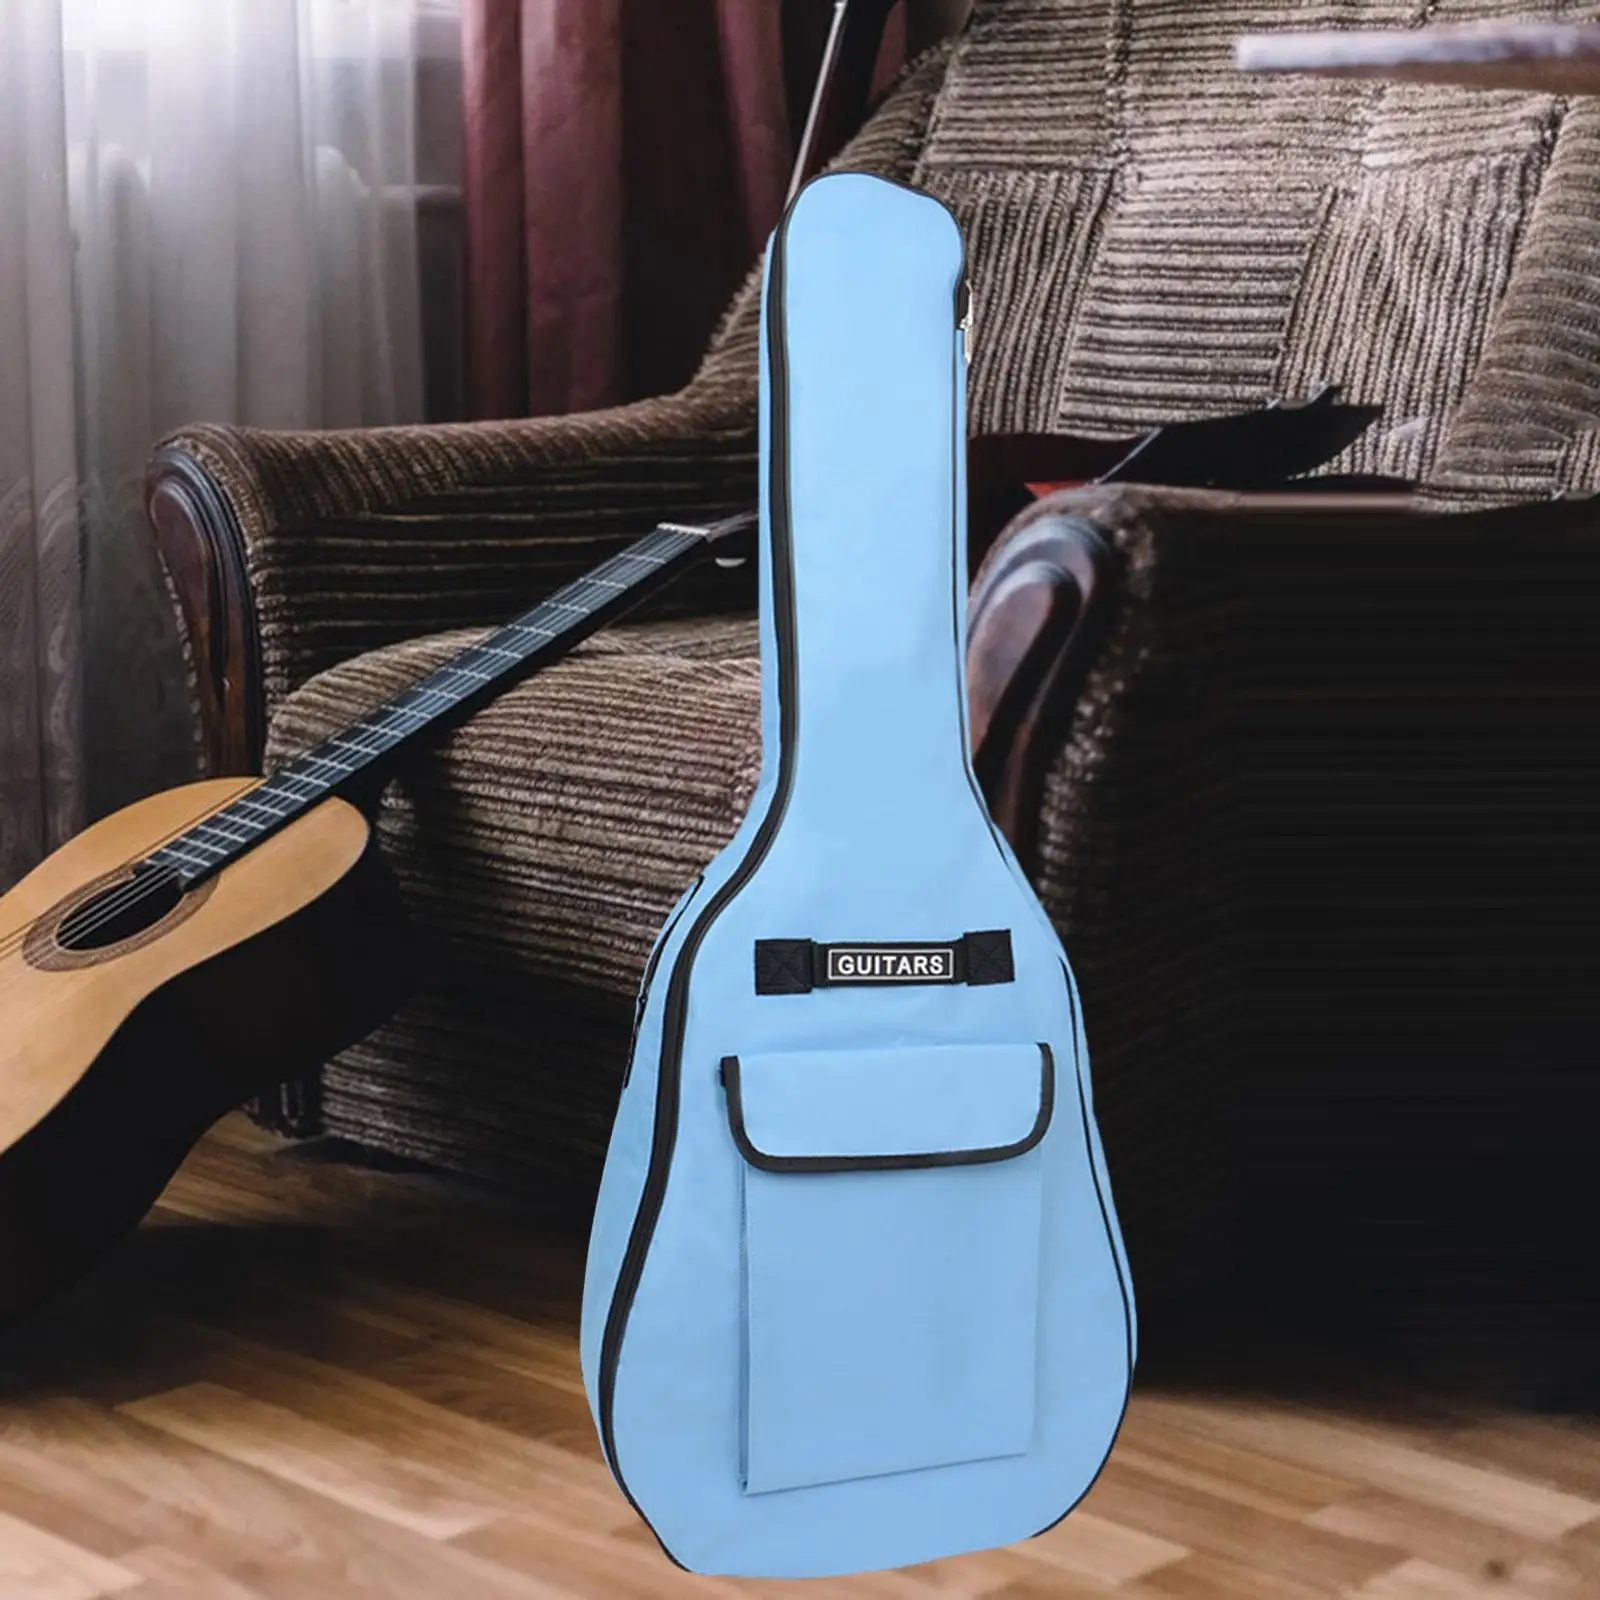 Guitar Bag Guitar Case Carrying Handle Travel Oxford Cloth Electric Guitar Dust Cover, Guitar Gig Bag for Notebook Cables